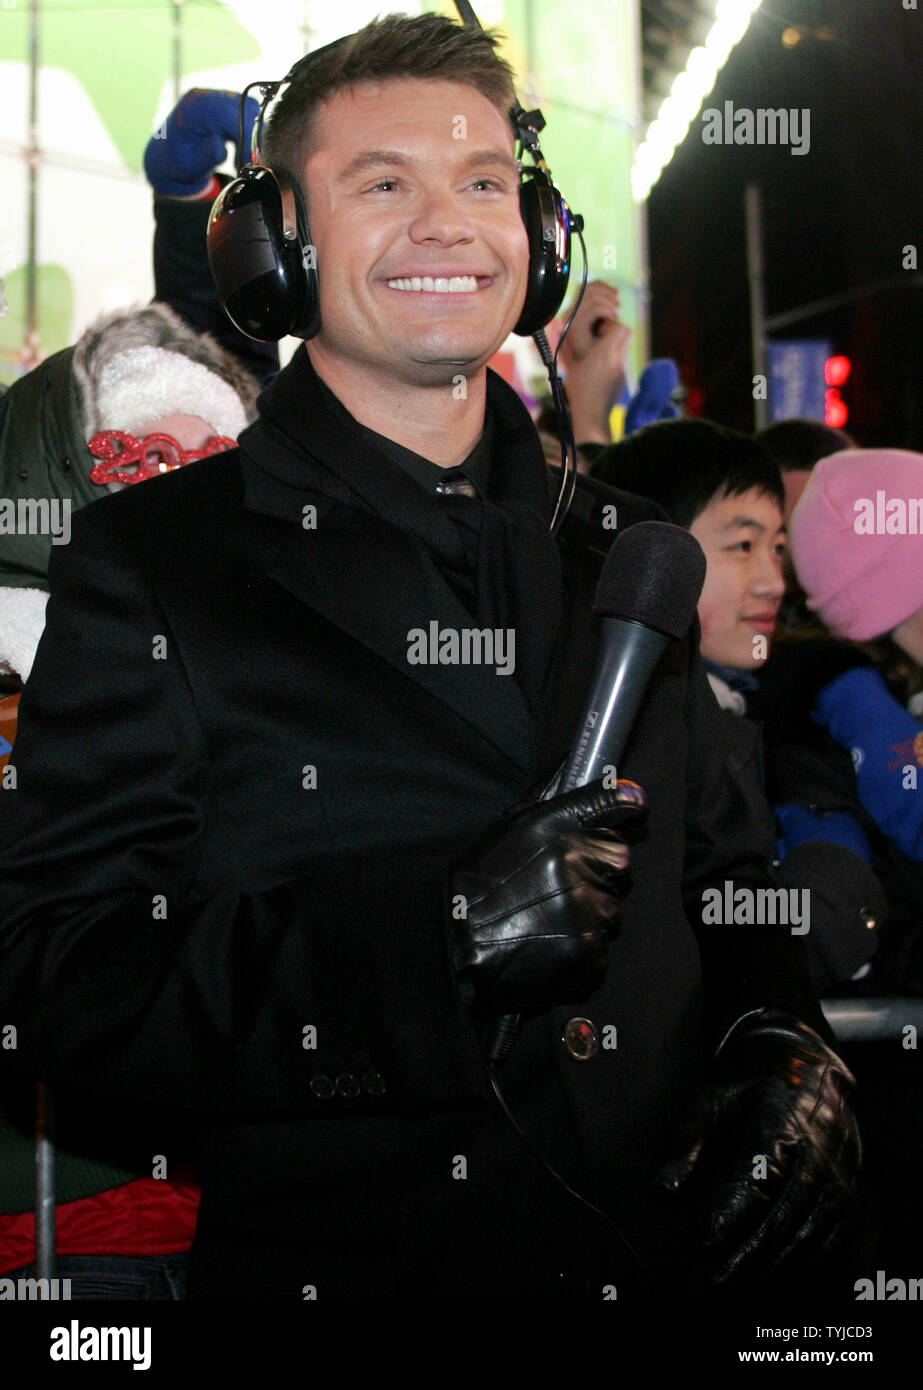 American Idol host Ryan Seacrest does a live broadcast spot before people gathered in Times Square to celebrate New Year's Eve on January 1, 2008 in New York. (UPI Photo/Monika Graff). Stock Photo